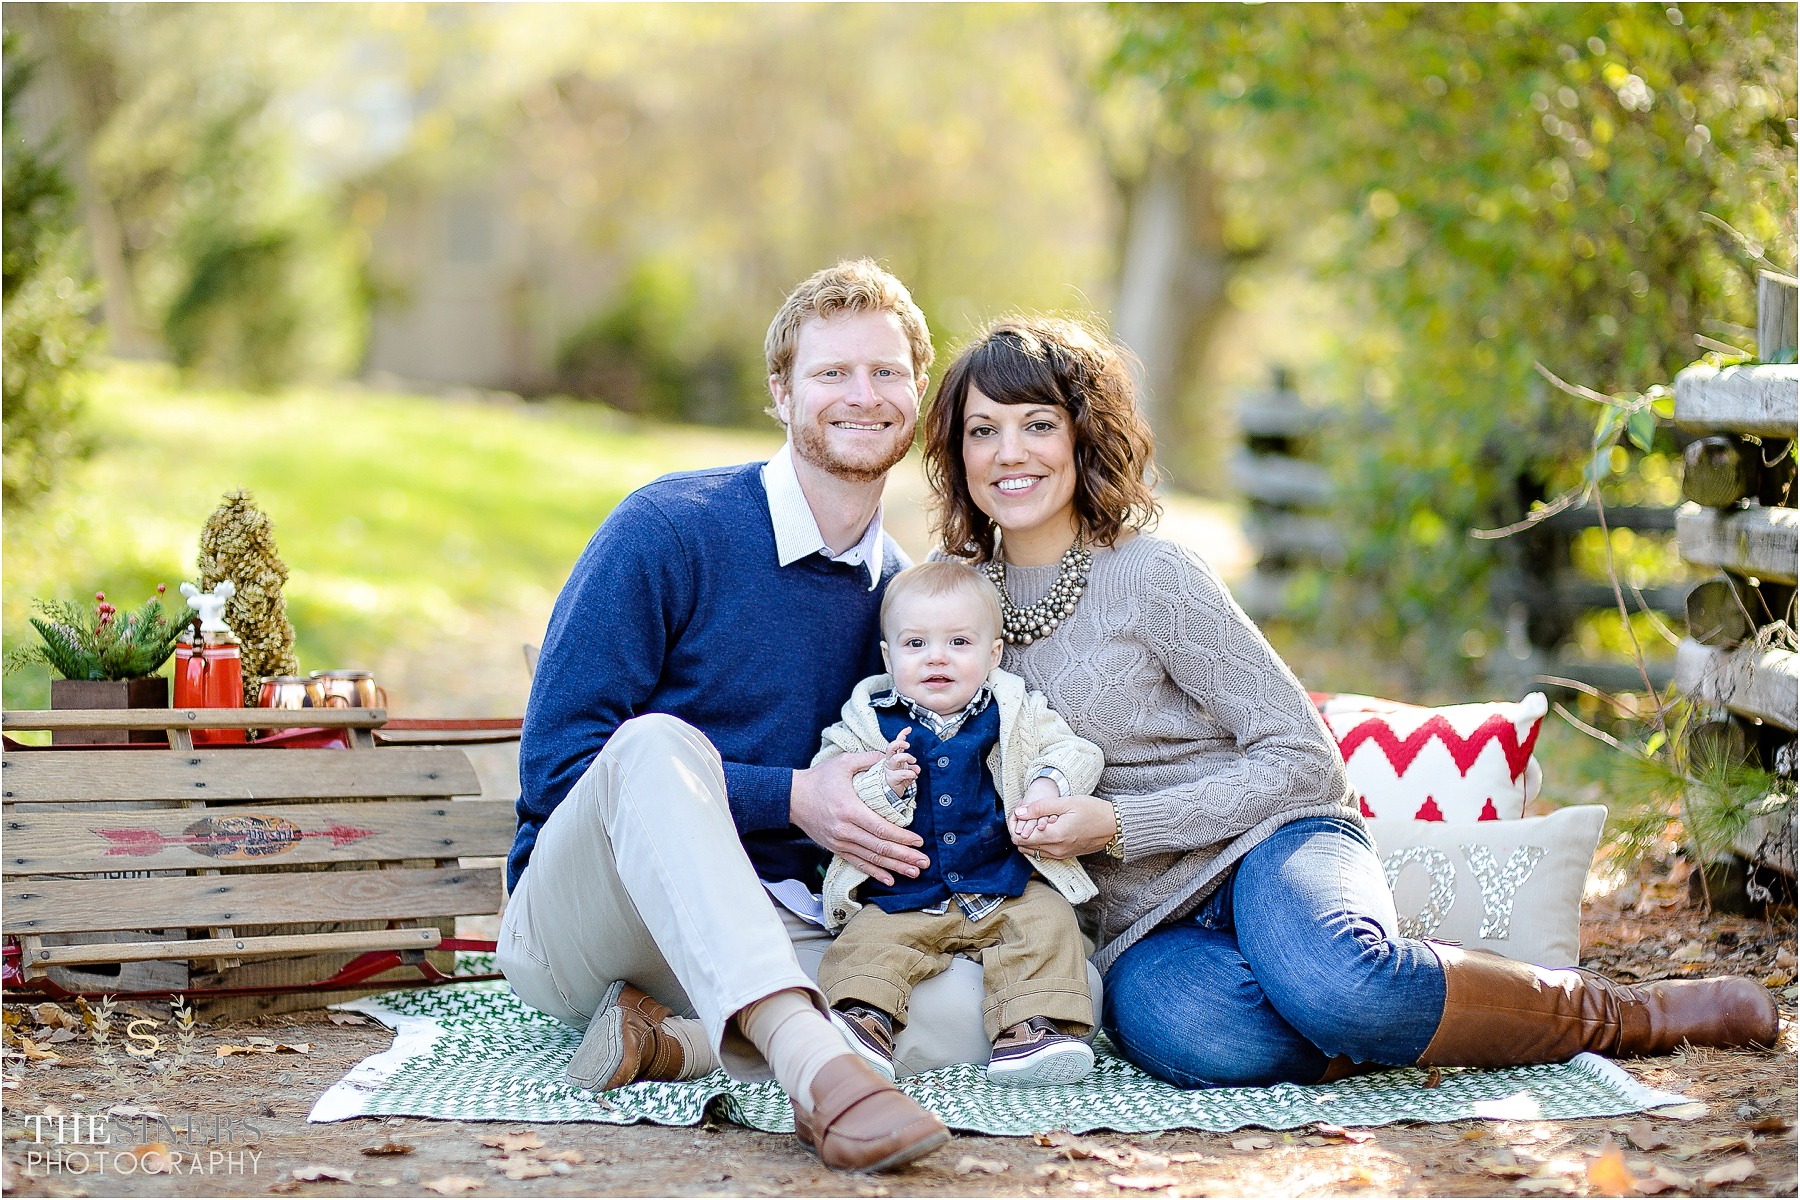 Mahoney Family_Indianapolis Family Photographer_TheSinersPhotography_0001